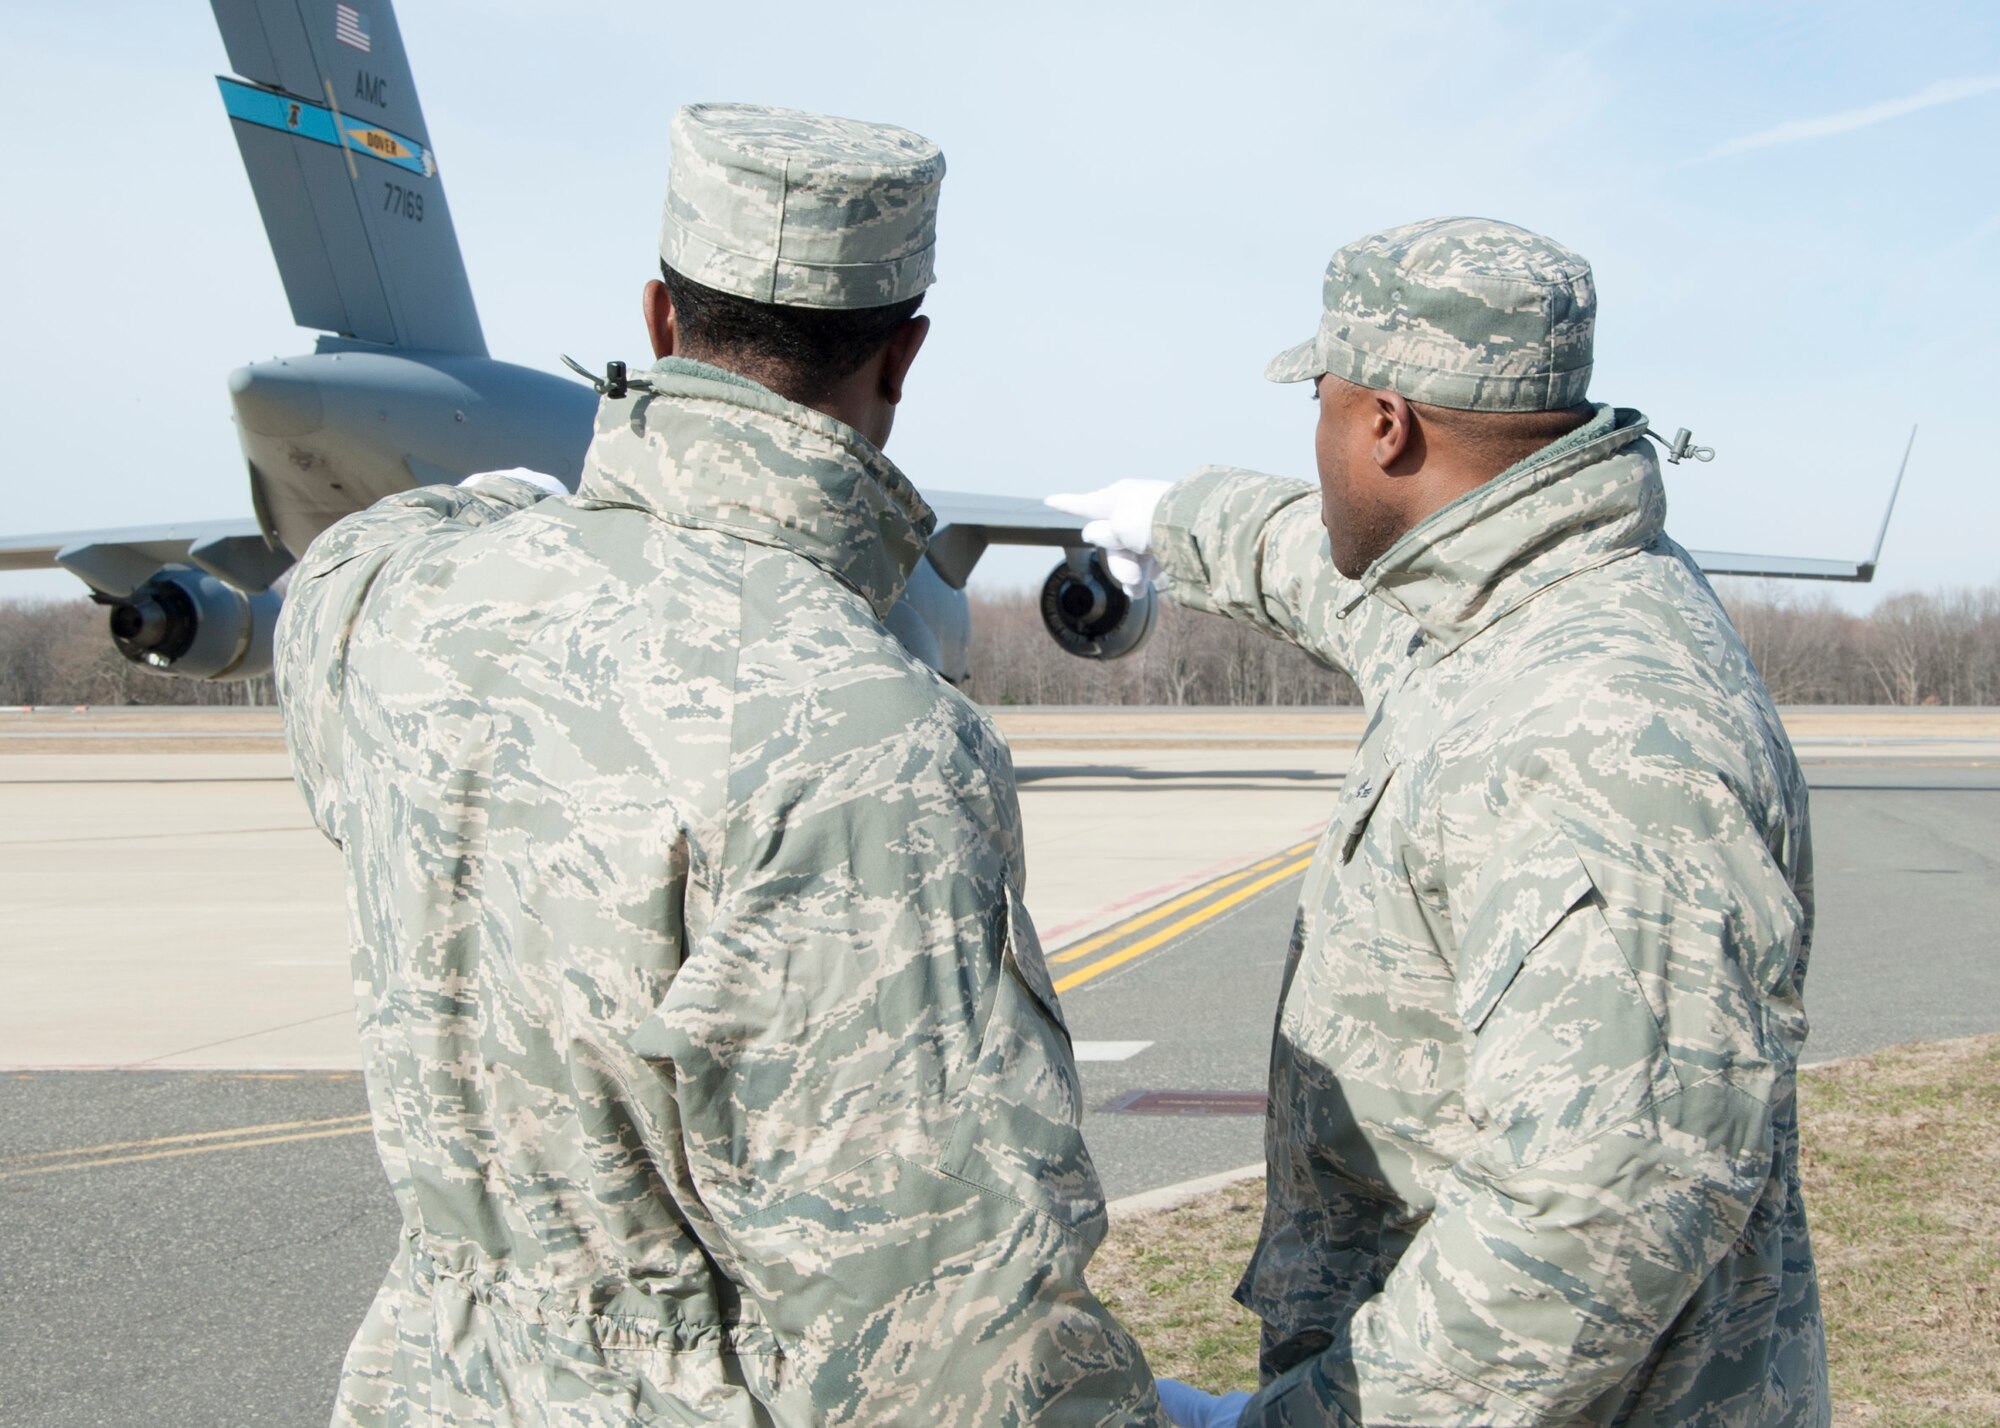 Senior Airman Omar Hall (right), provides coaching to first-time AFMAO deployer Senior Airman Marcus Wesley during a dignified transfer divert exercise March 19, 2015, at New Castle Air National Guard Base, Del. Hall has deployed to the mortuary five times and served as a carry team member for dignified transfers more than 100 times while Wesley has served as a carry team member three times. Both reservists are assigned to the 512th Memorial Affairs Squadron, Dover Air Force Base, Del. (U.S. Air Force photo/Senior Airman Jared Duhon)